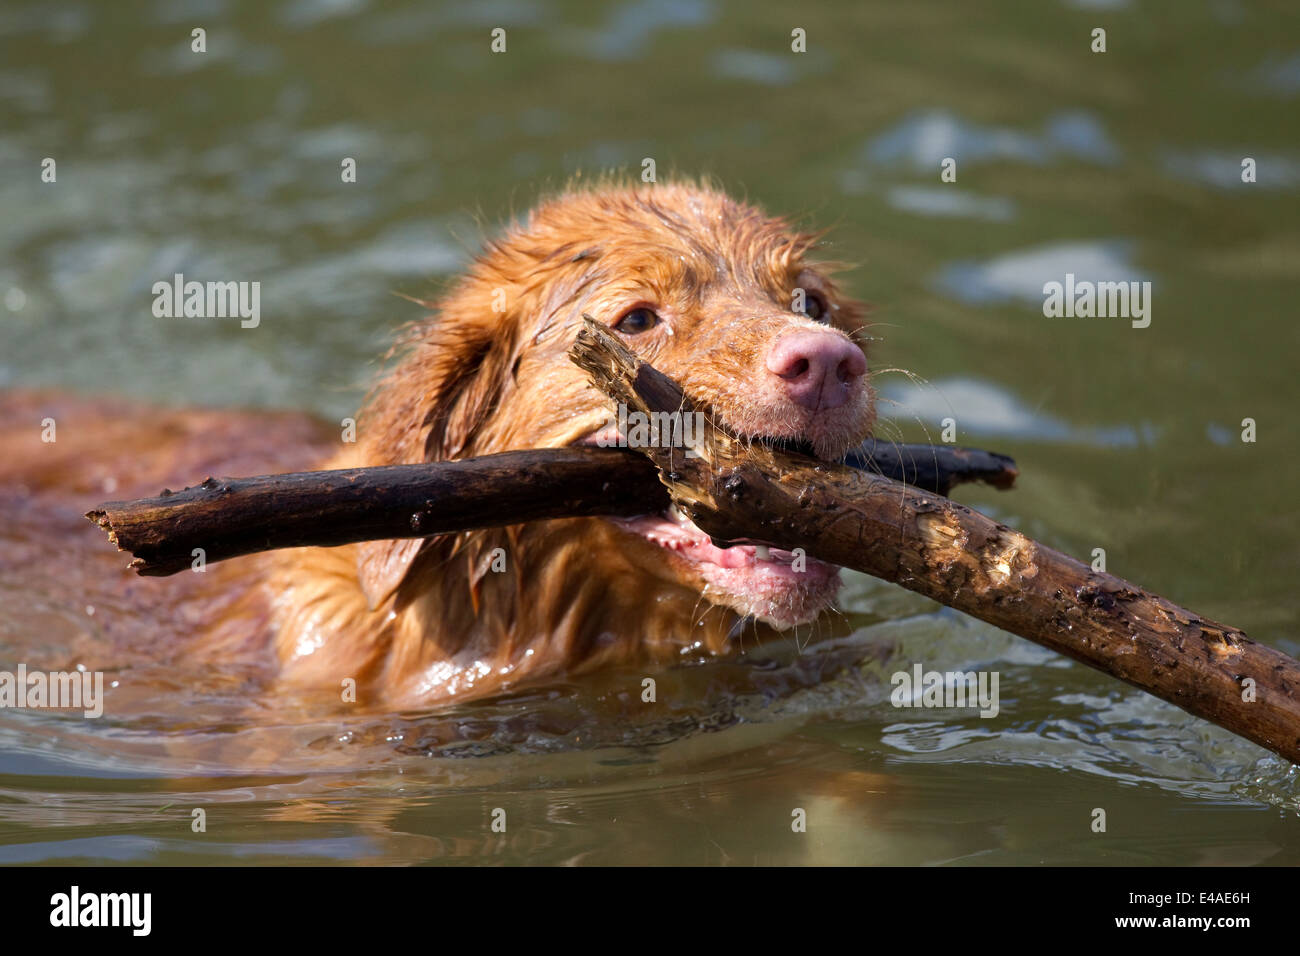 Golden Retriever dog swims with stick in its mouth. Stock Photo